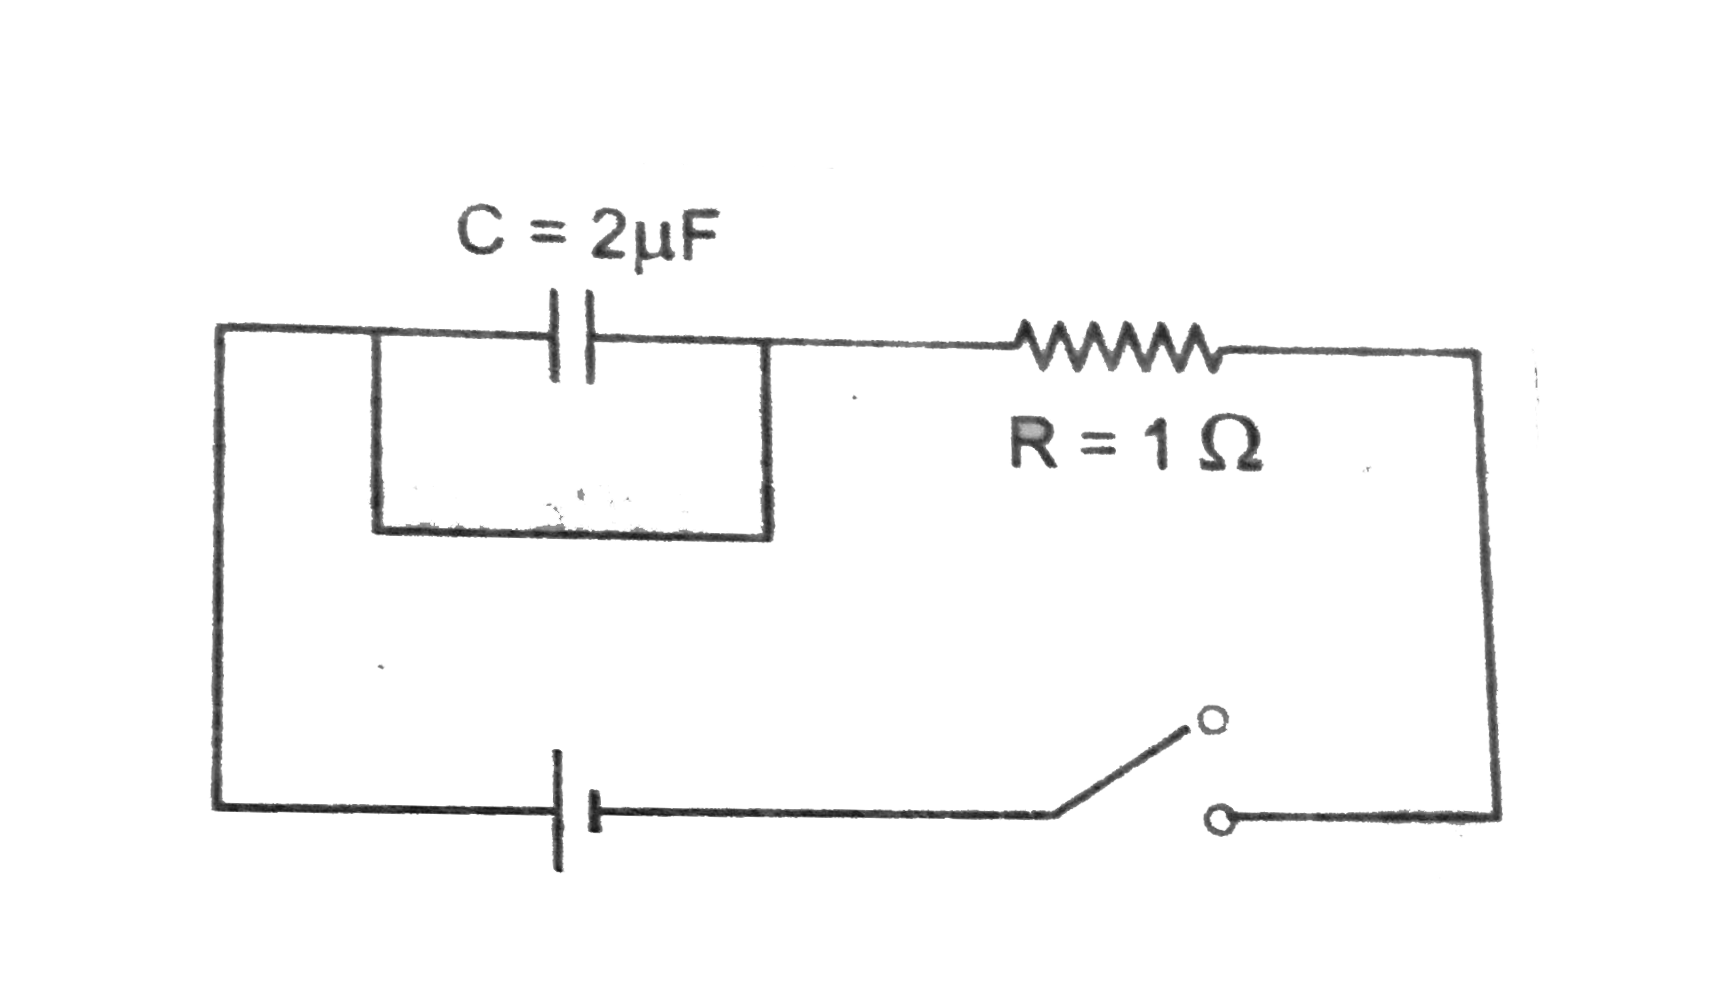 The capacitive time constant of the RC circuit shown in the figure.